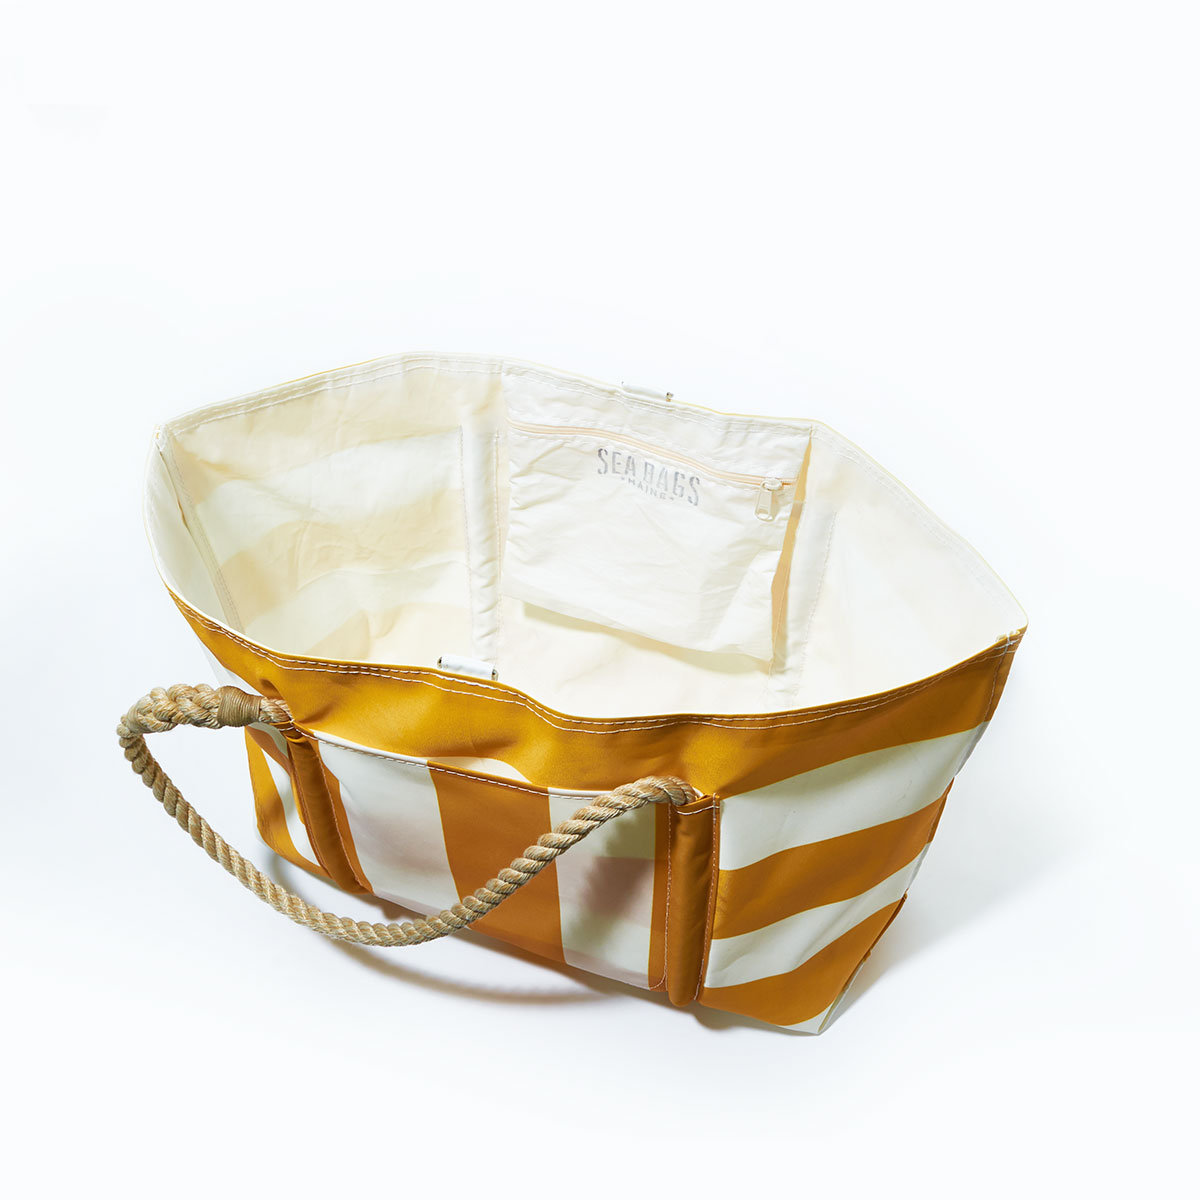 inside view: yellow and white plaid stripes adorn the front of a recycled sail cloth tote with hemp rope handles and a top metal clasp